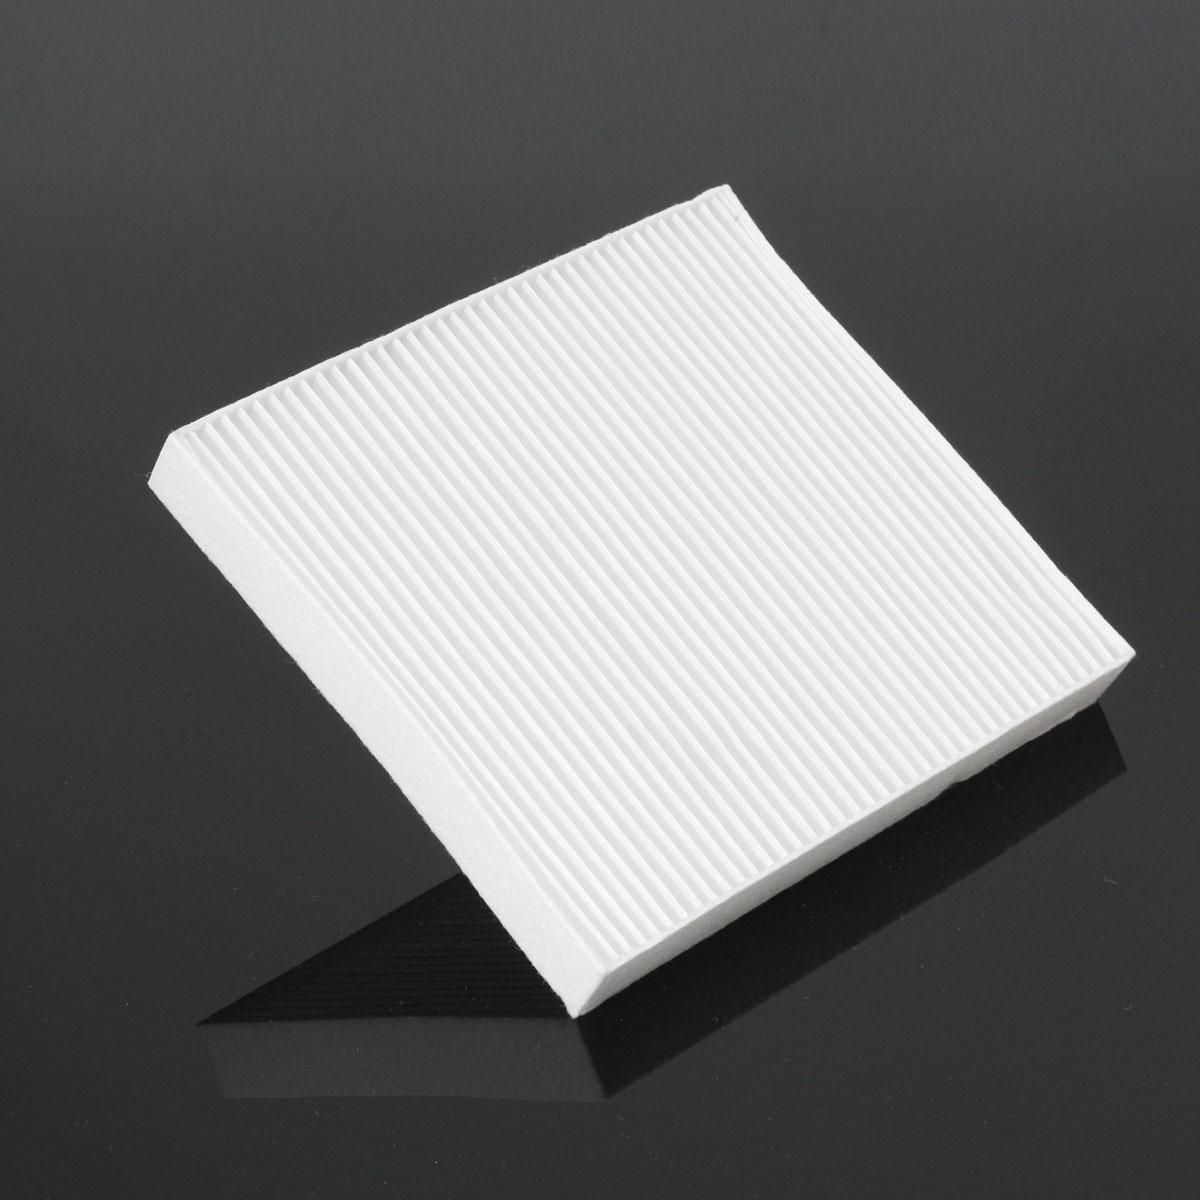 Yulicoauto AIR COND CABIN AIR FILTER for Proton Preve